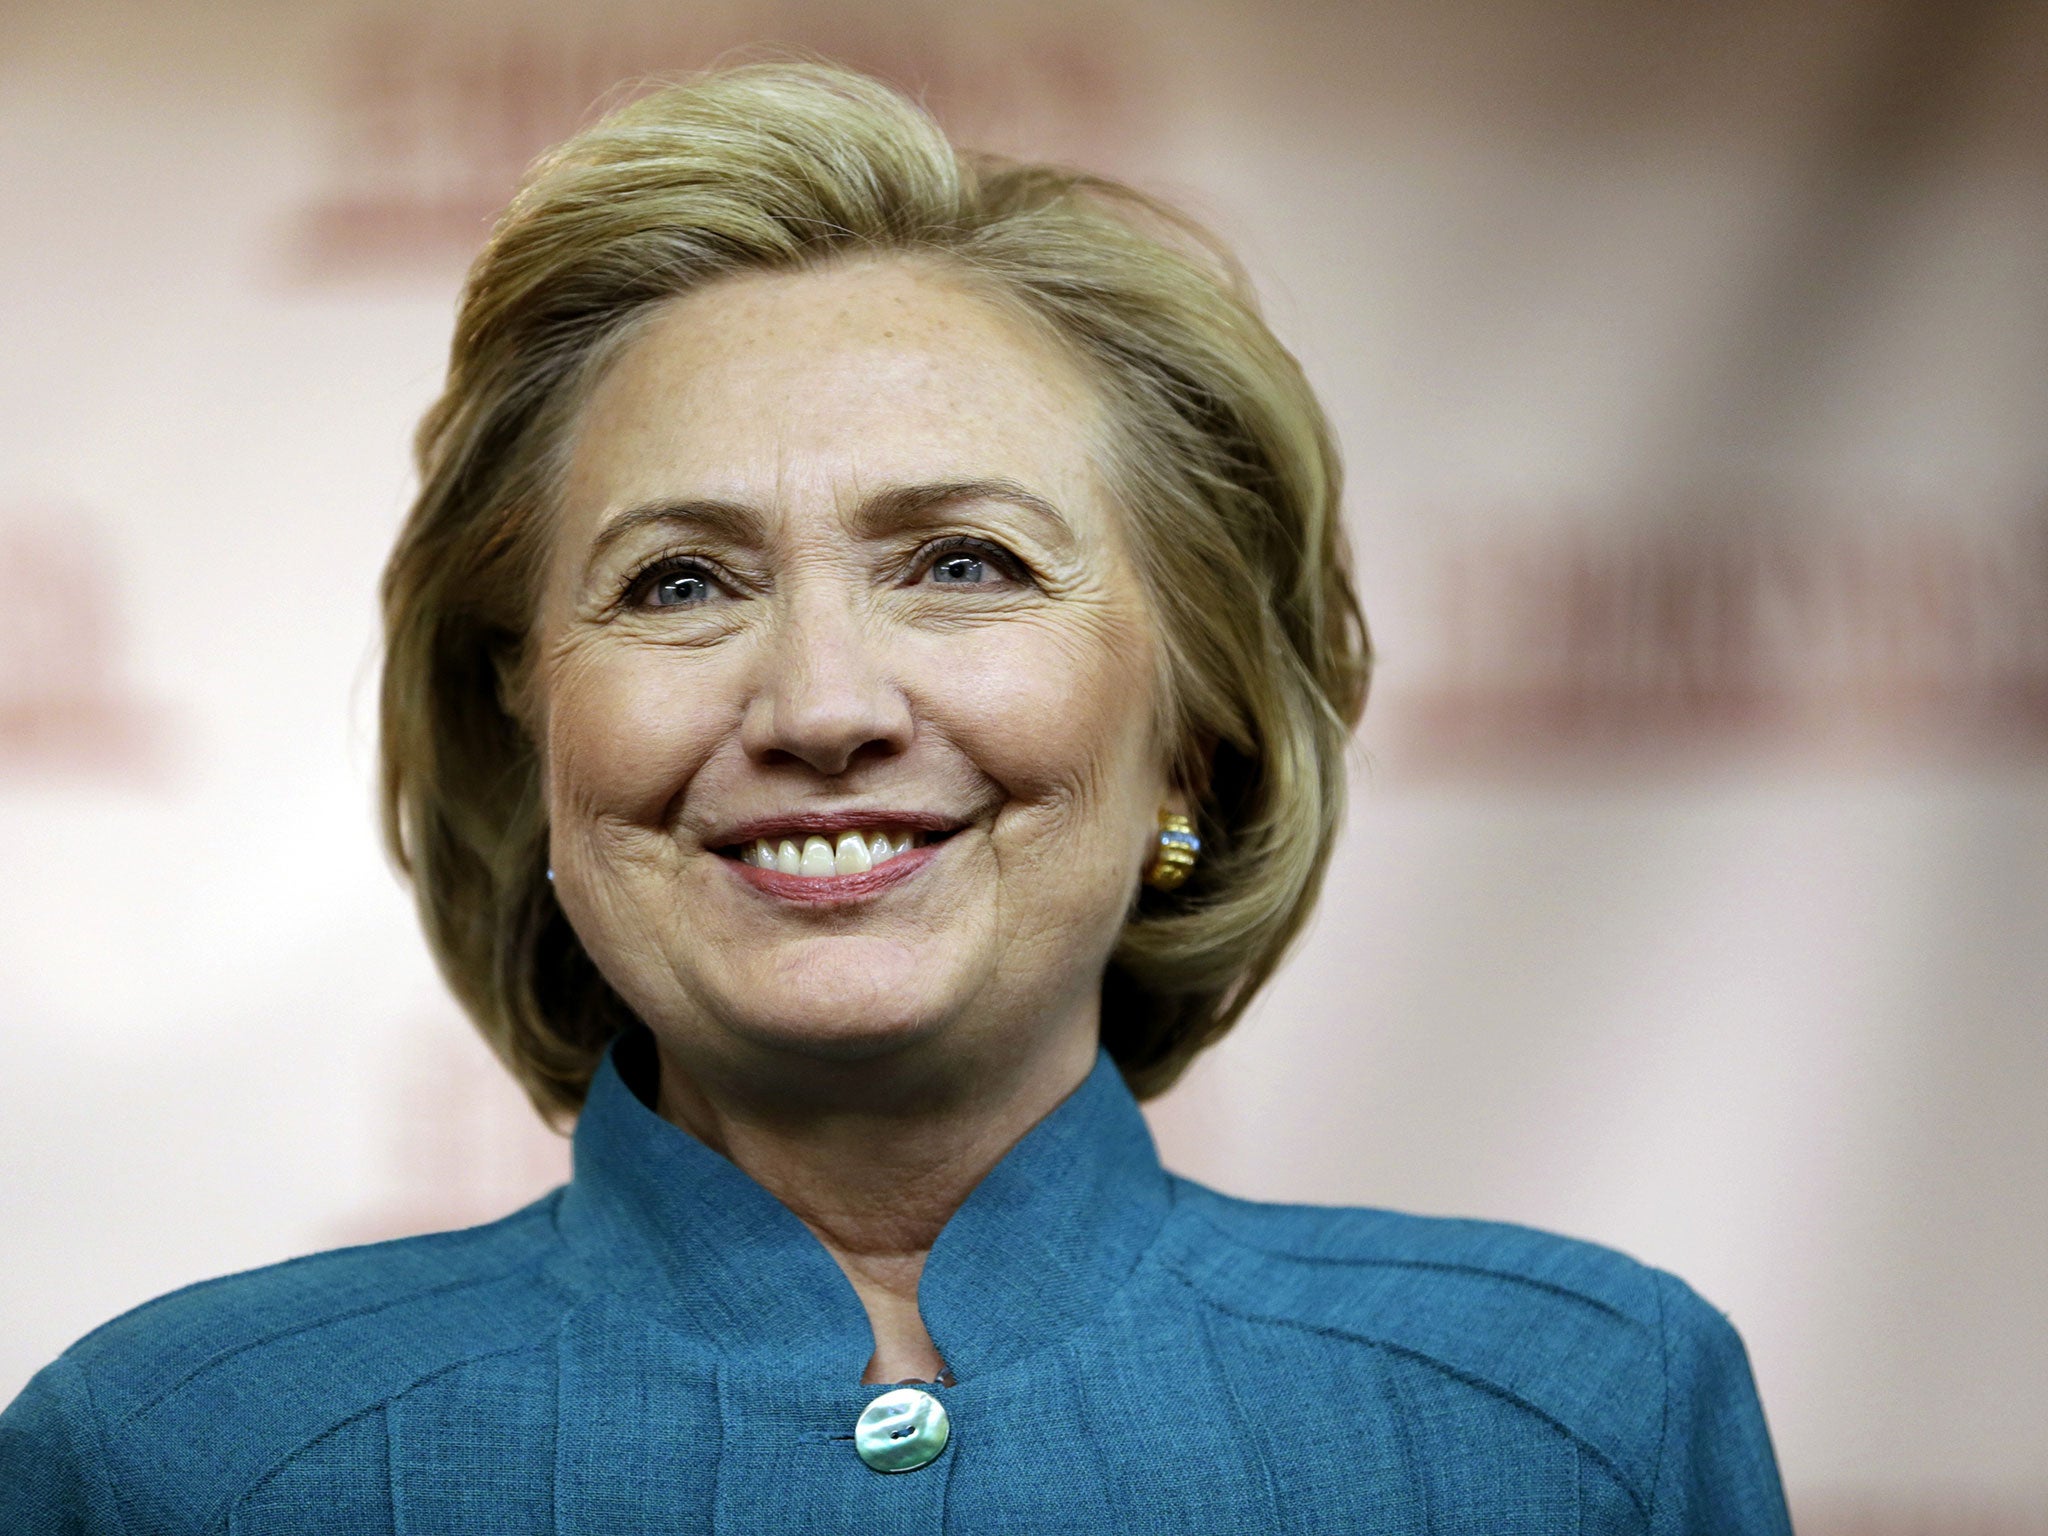 Clinton, who is known for her pantsuit collection, has hired a team of image experts